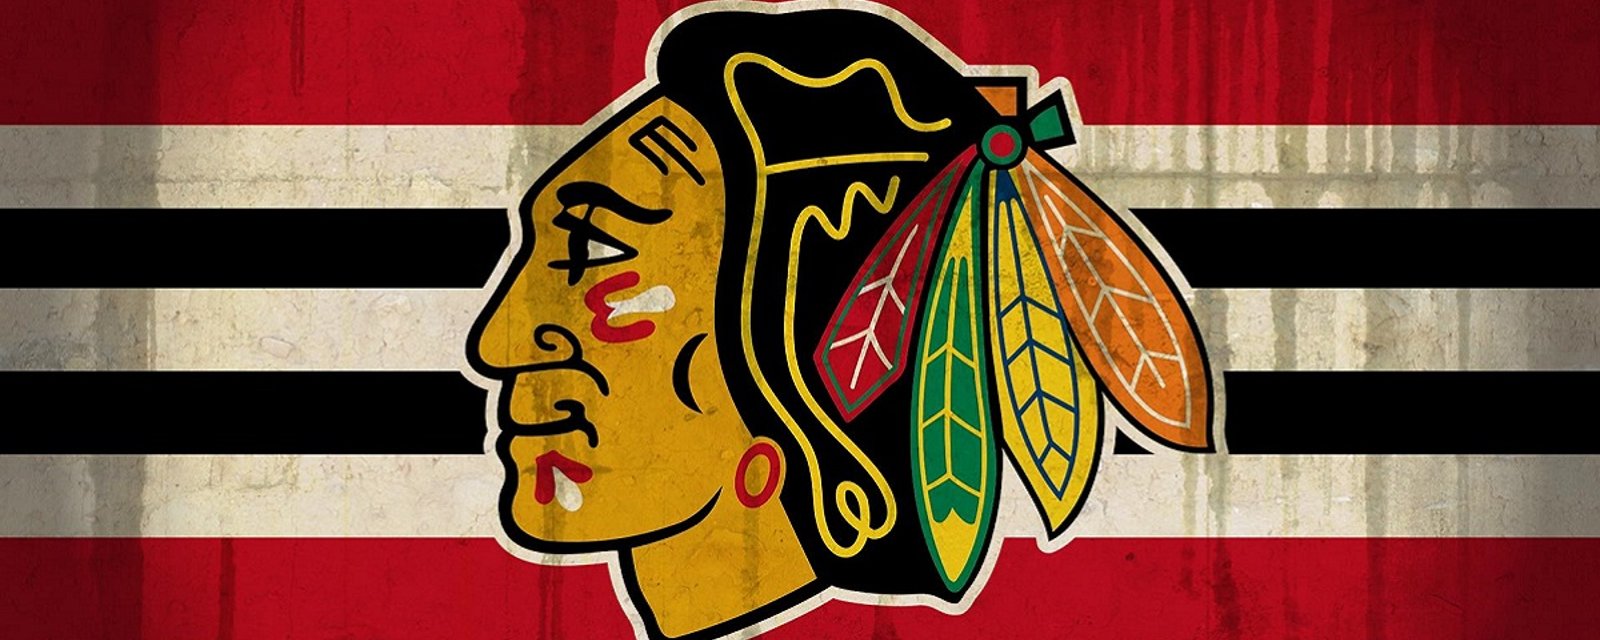 Breaking: Blackhawks may be working on a huge trade.